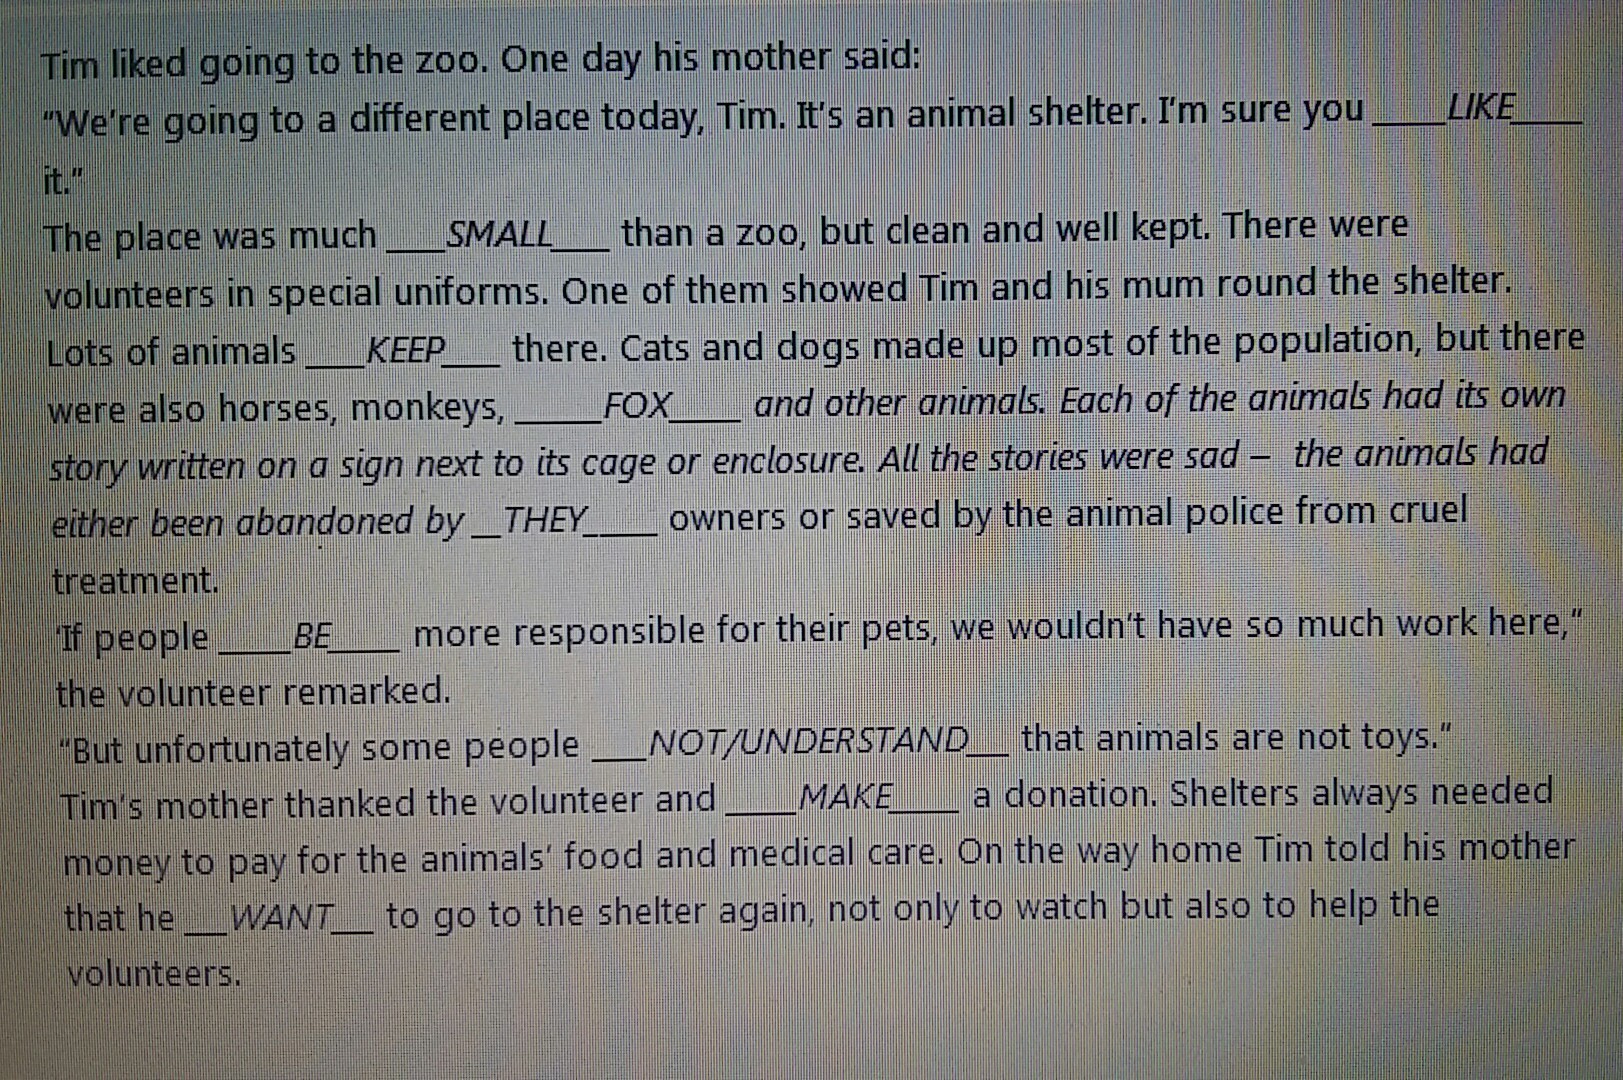 Tim liked going to the. We all like going to the Zoo but what. We all like going to the Zoo but what about the animals перевод. Tom's mother thanked the Volunteer and s donation. Shelters always needed money to pay for the animals food and Medical Care.